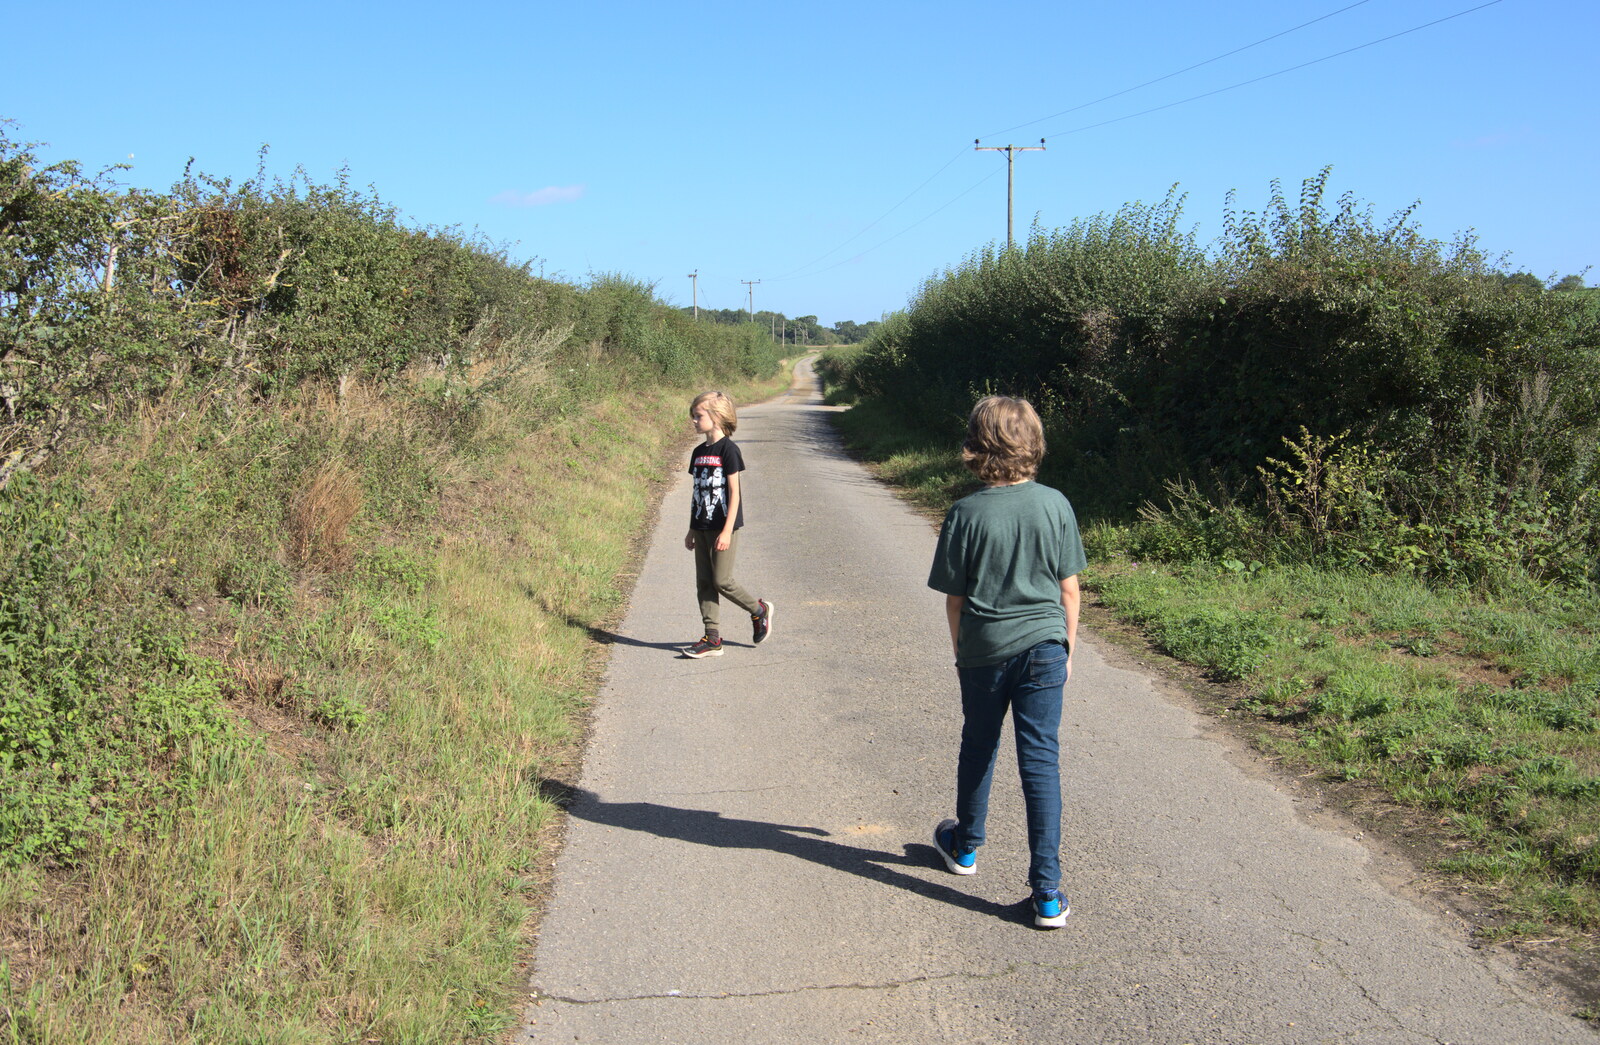 The boys roam around on the old road from A Sail Fitting, Billingford Windmill, Billingford, Norfolk - 20th August 2020